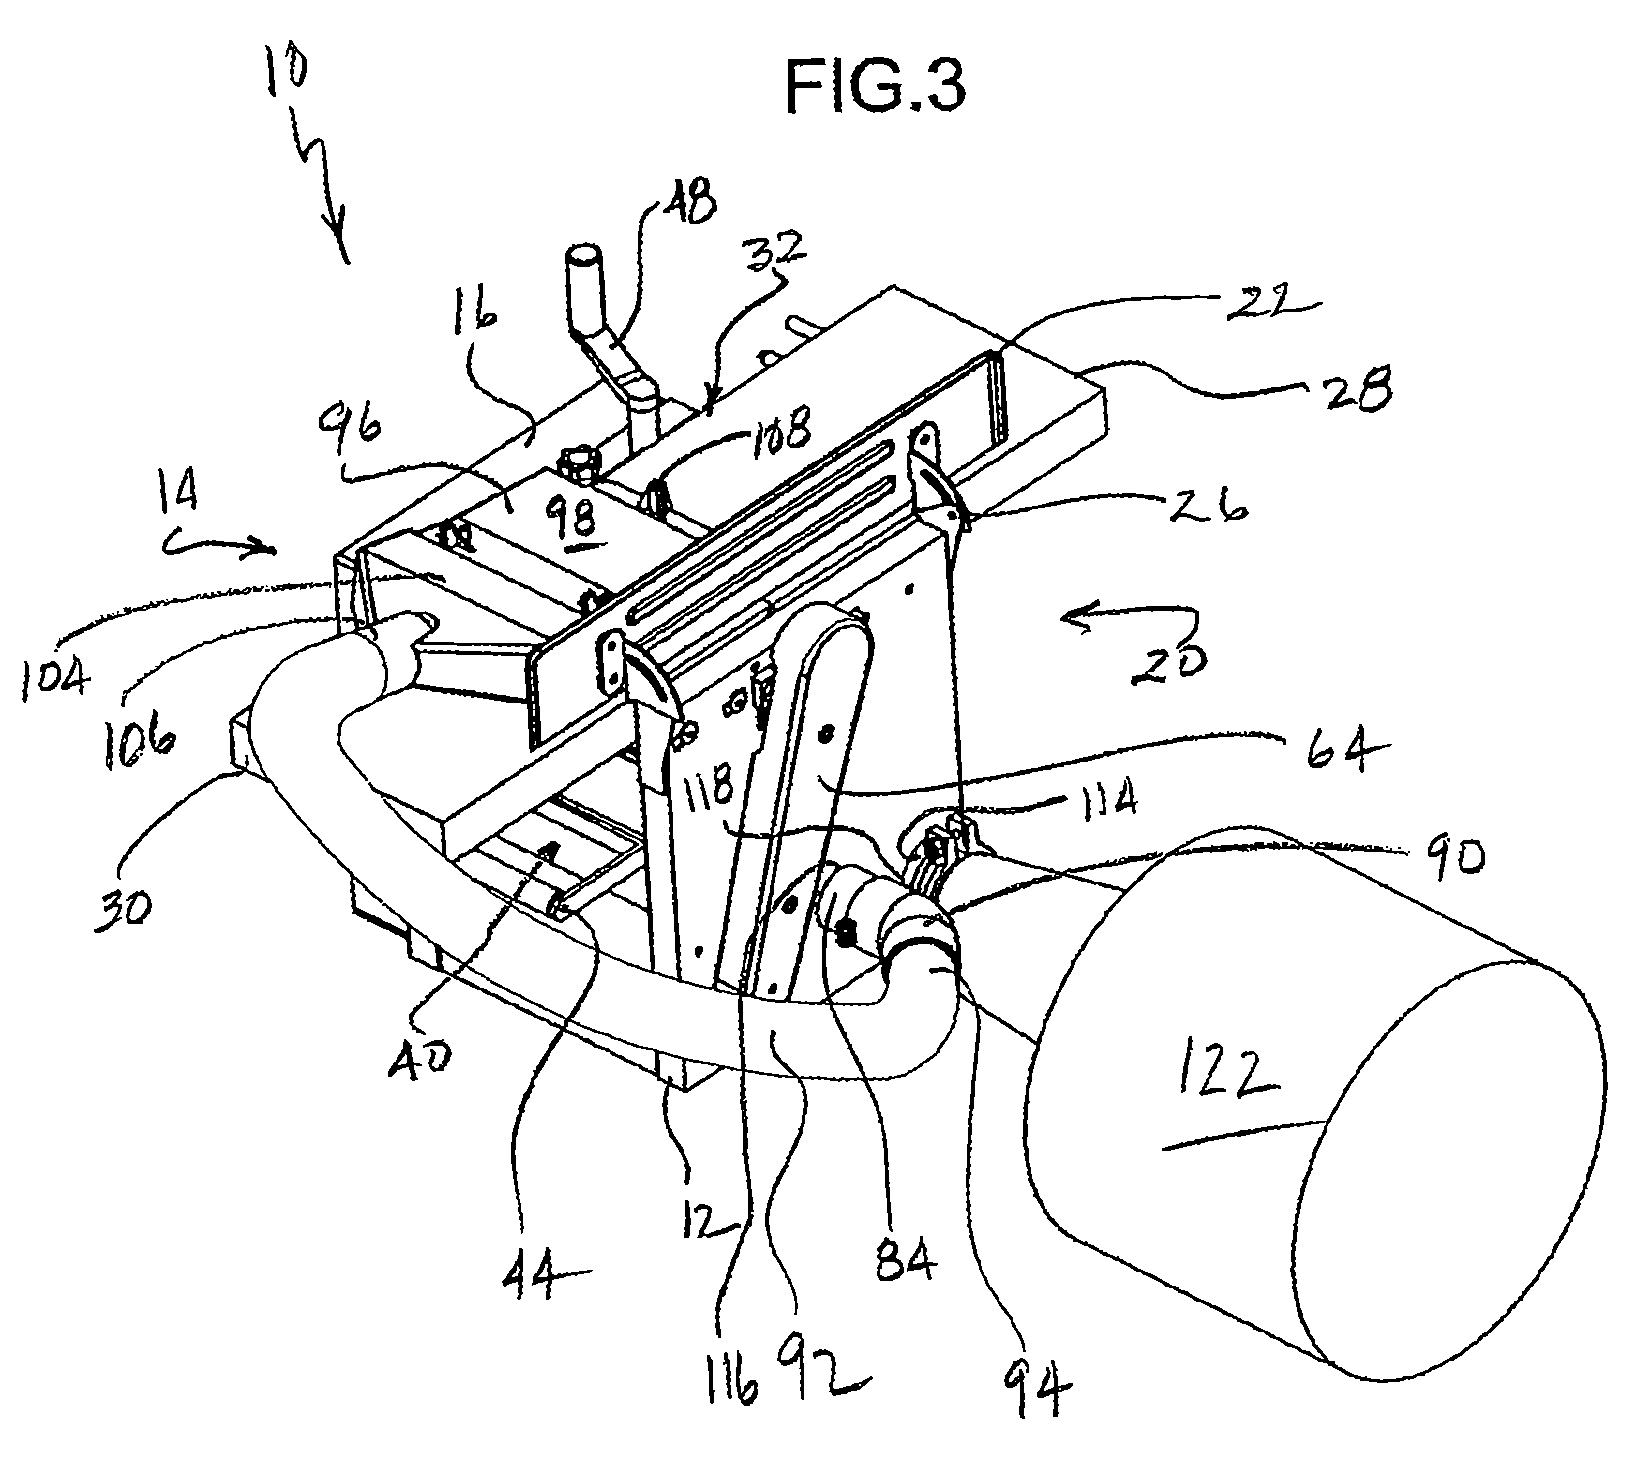 Jointer/planer with internal sawdust collection system